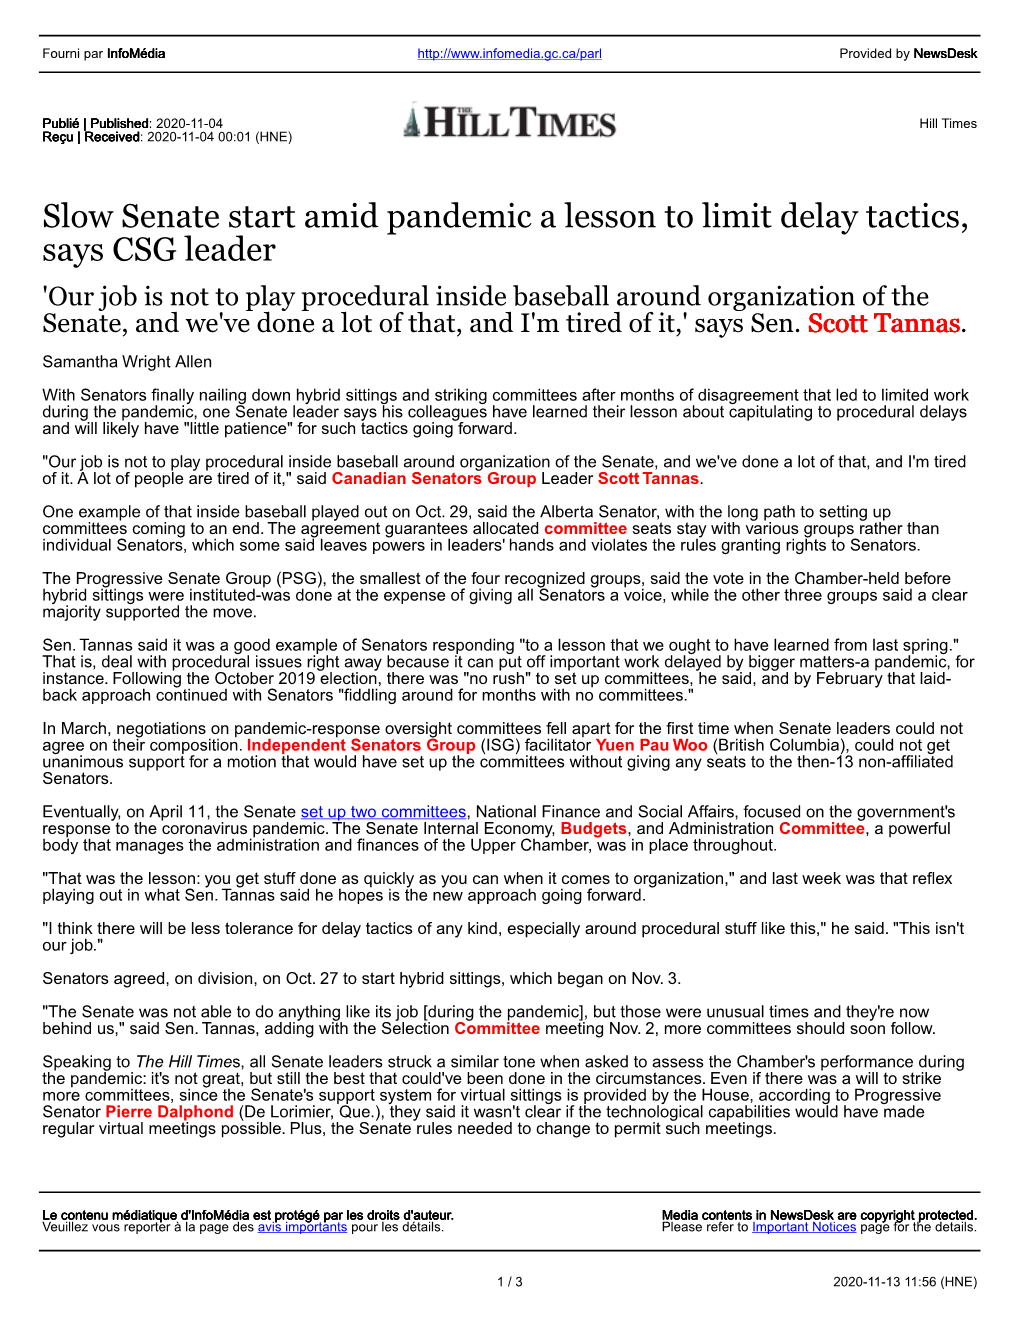 Slow Senate Start Amid Pandemic a Lesson to Limit Delay Tactics, Says